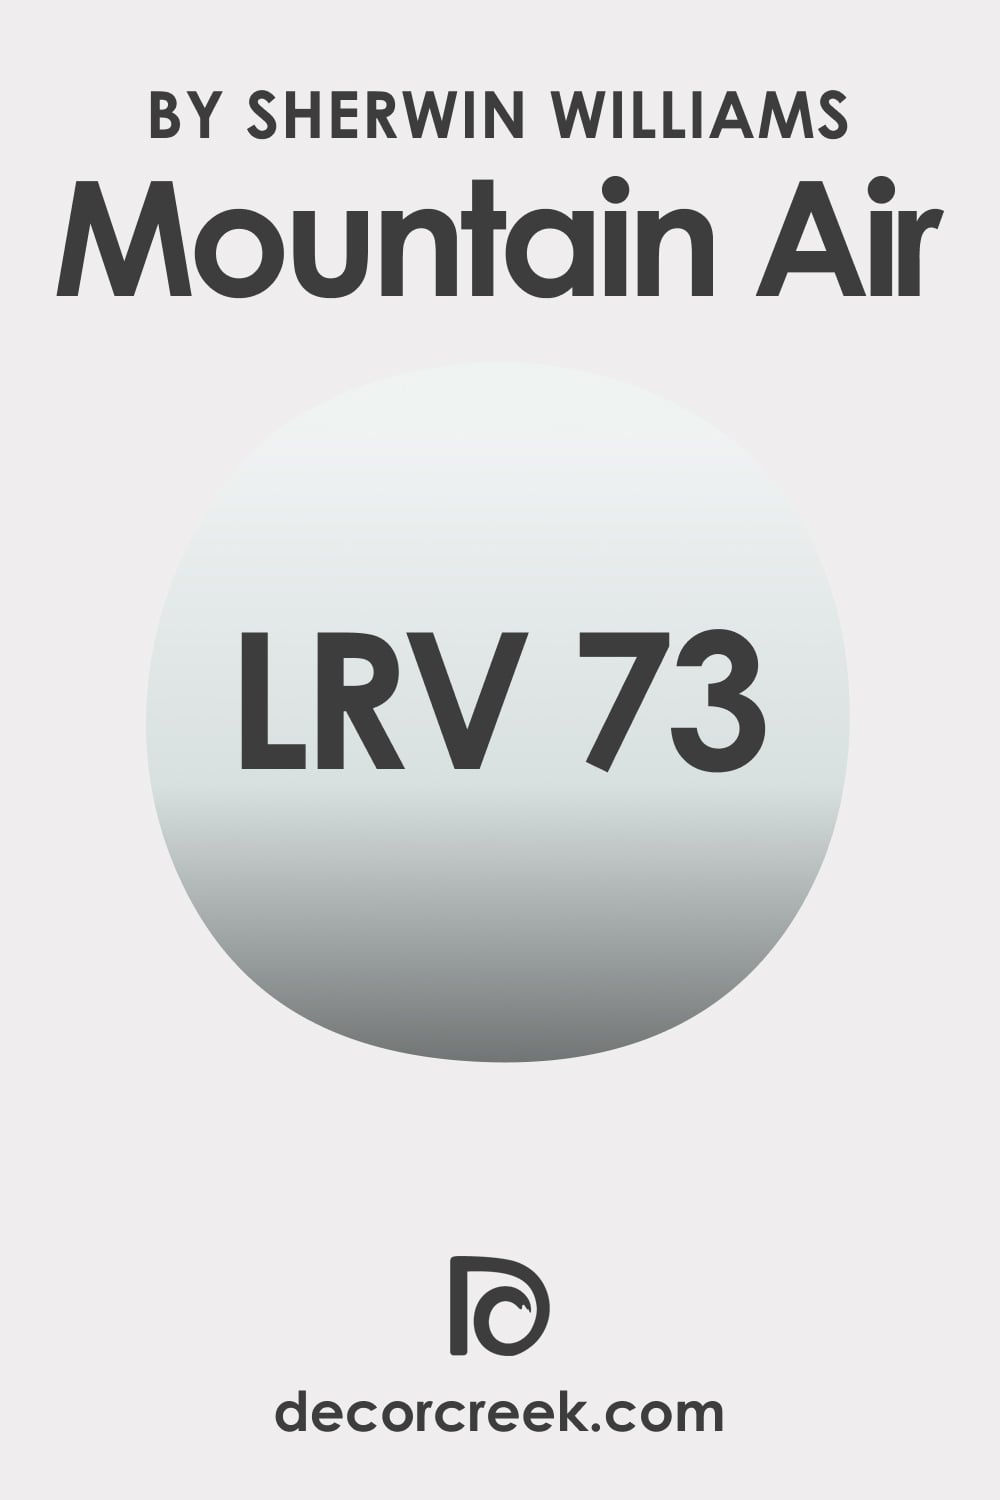 What LRV the Mountain Air Color Has?